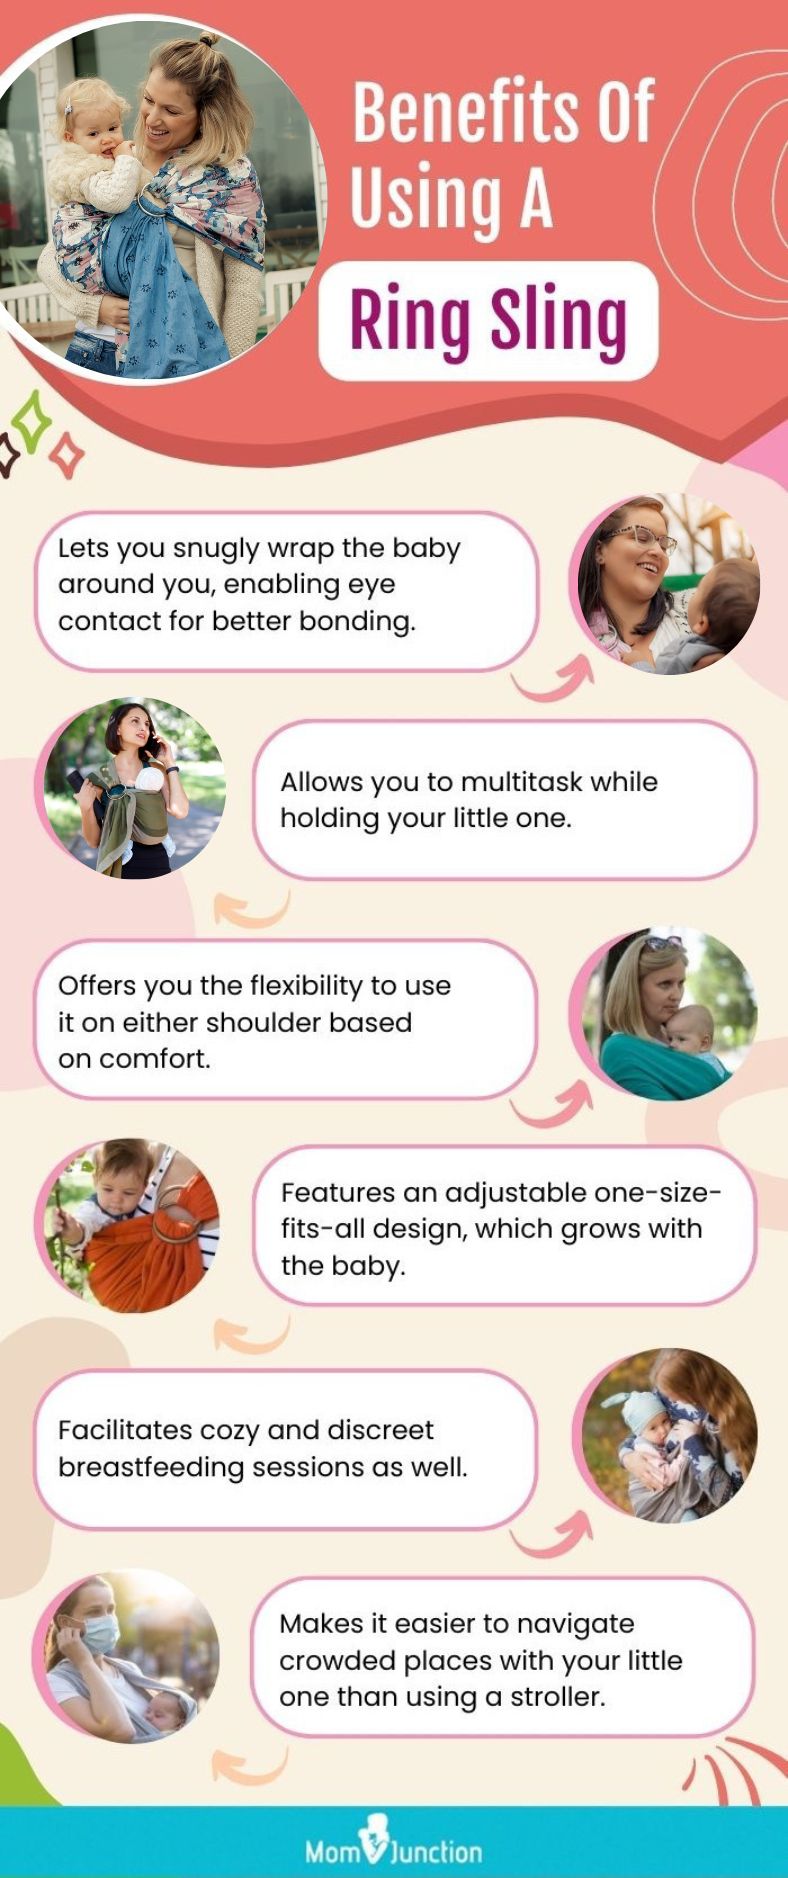 Benefits Of Using A Ring Sling (infographic)